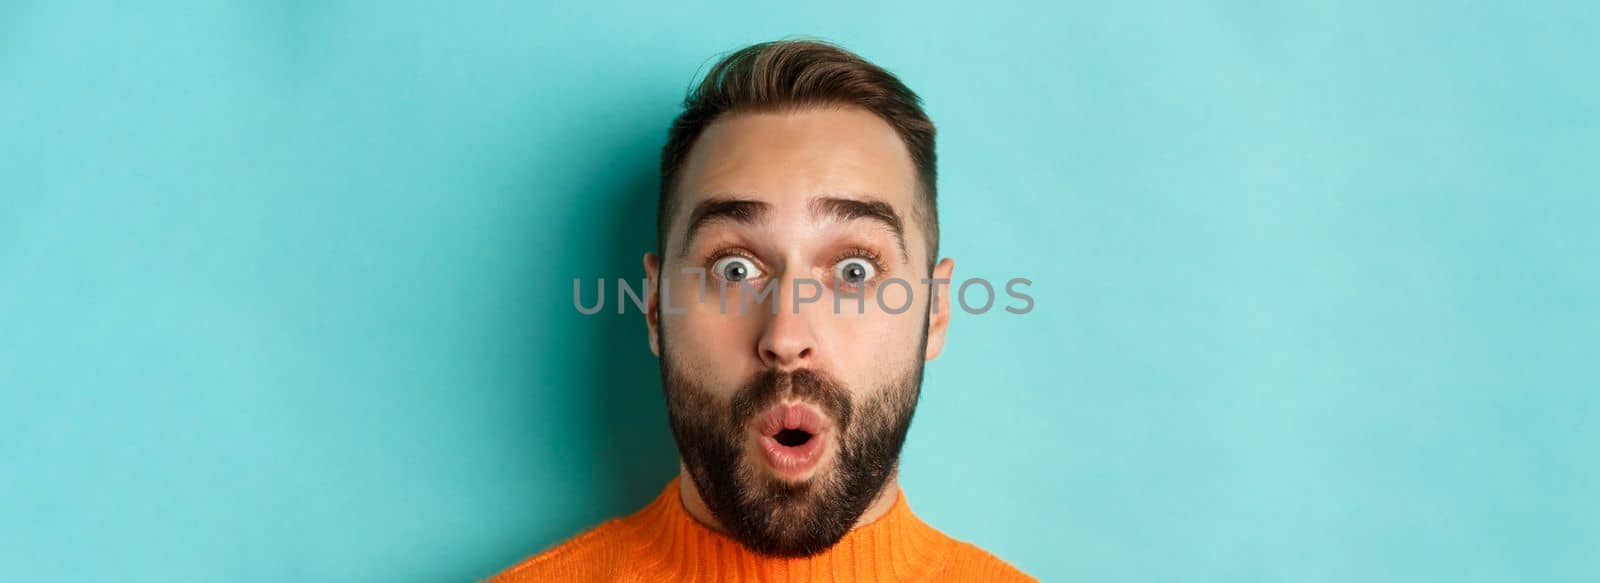 Headshot of handsome caucasian man with beard standing in orange sweater against turquoise background, saying wow and staring surprised at camera by Benzoix